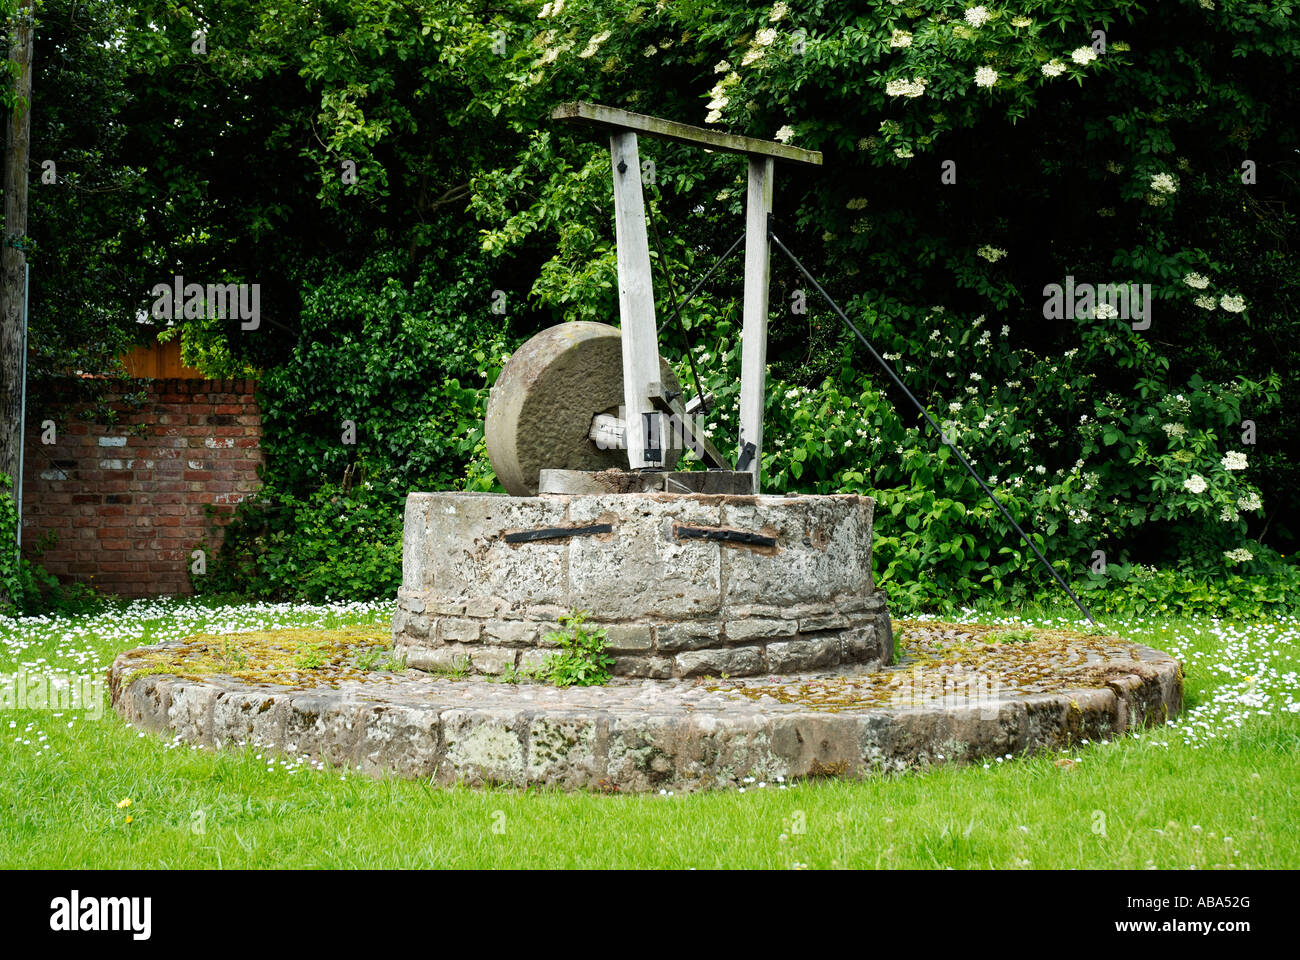 An old apple press in Hereford. These presses were used in the making of cider, it now is used as decoration. Stock Photo